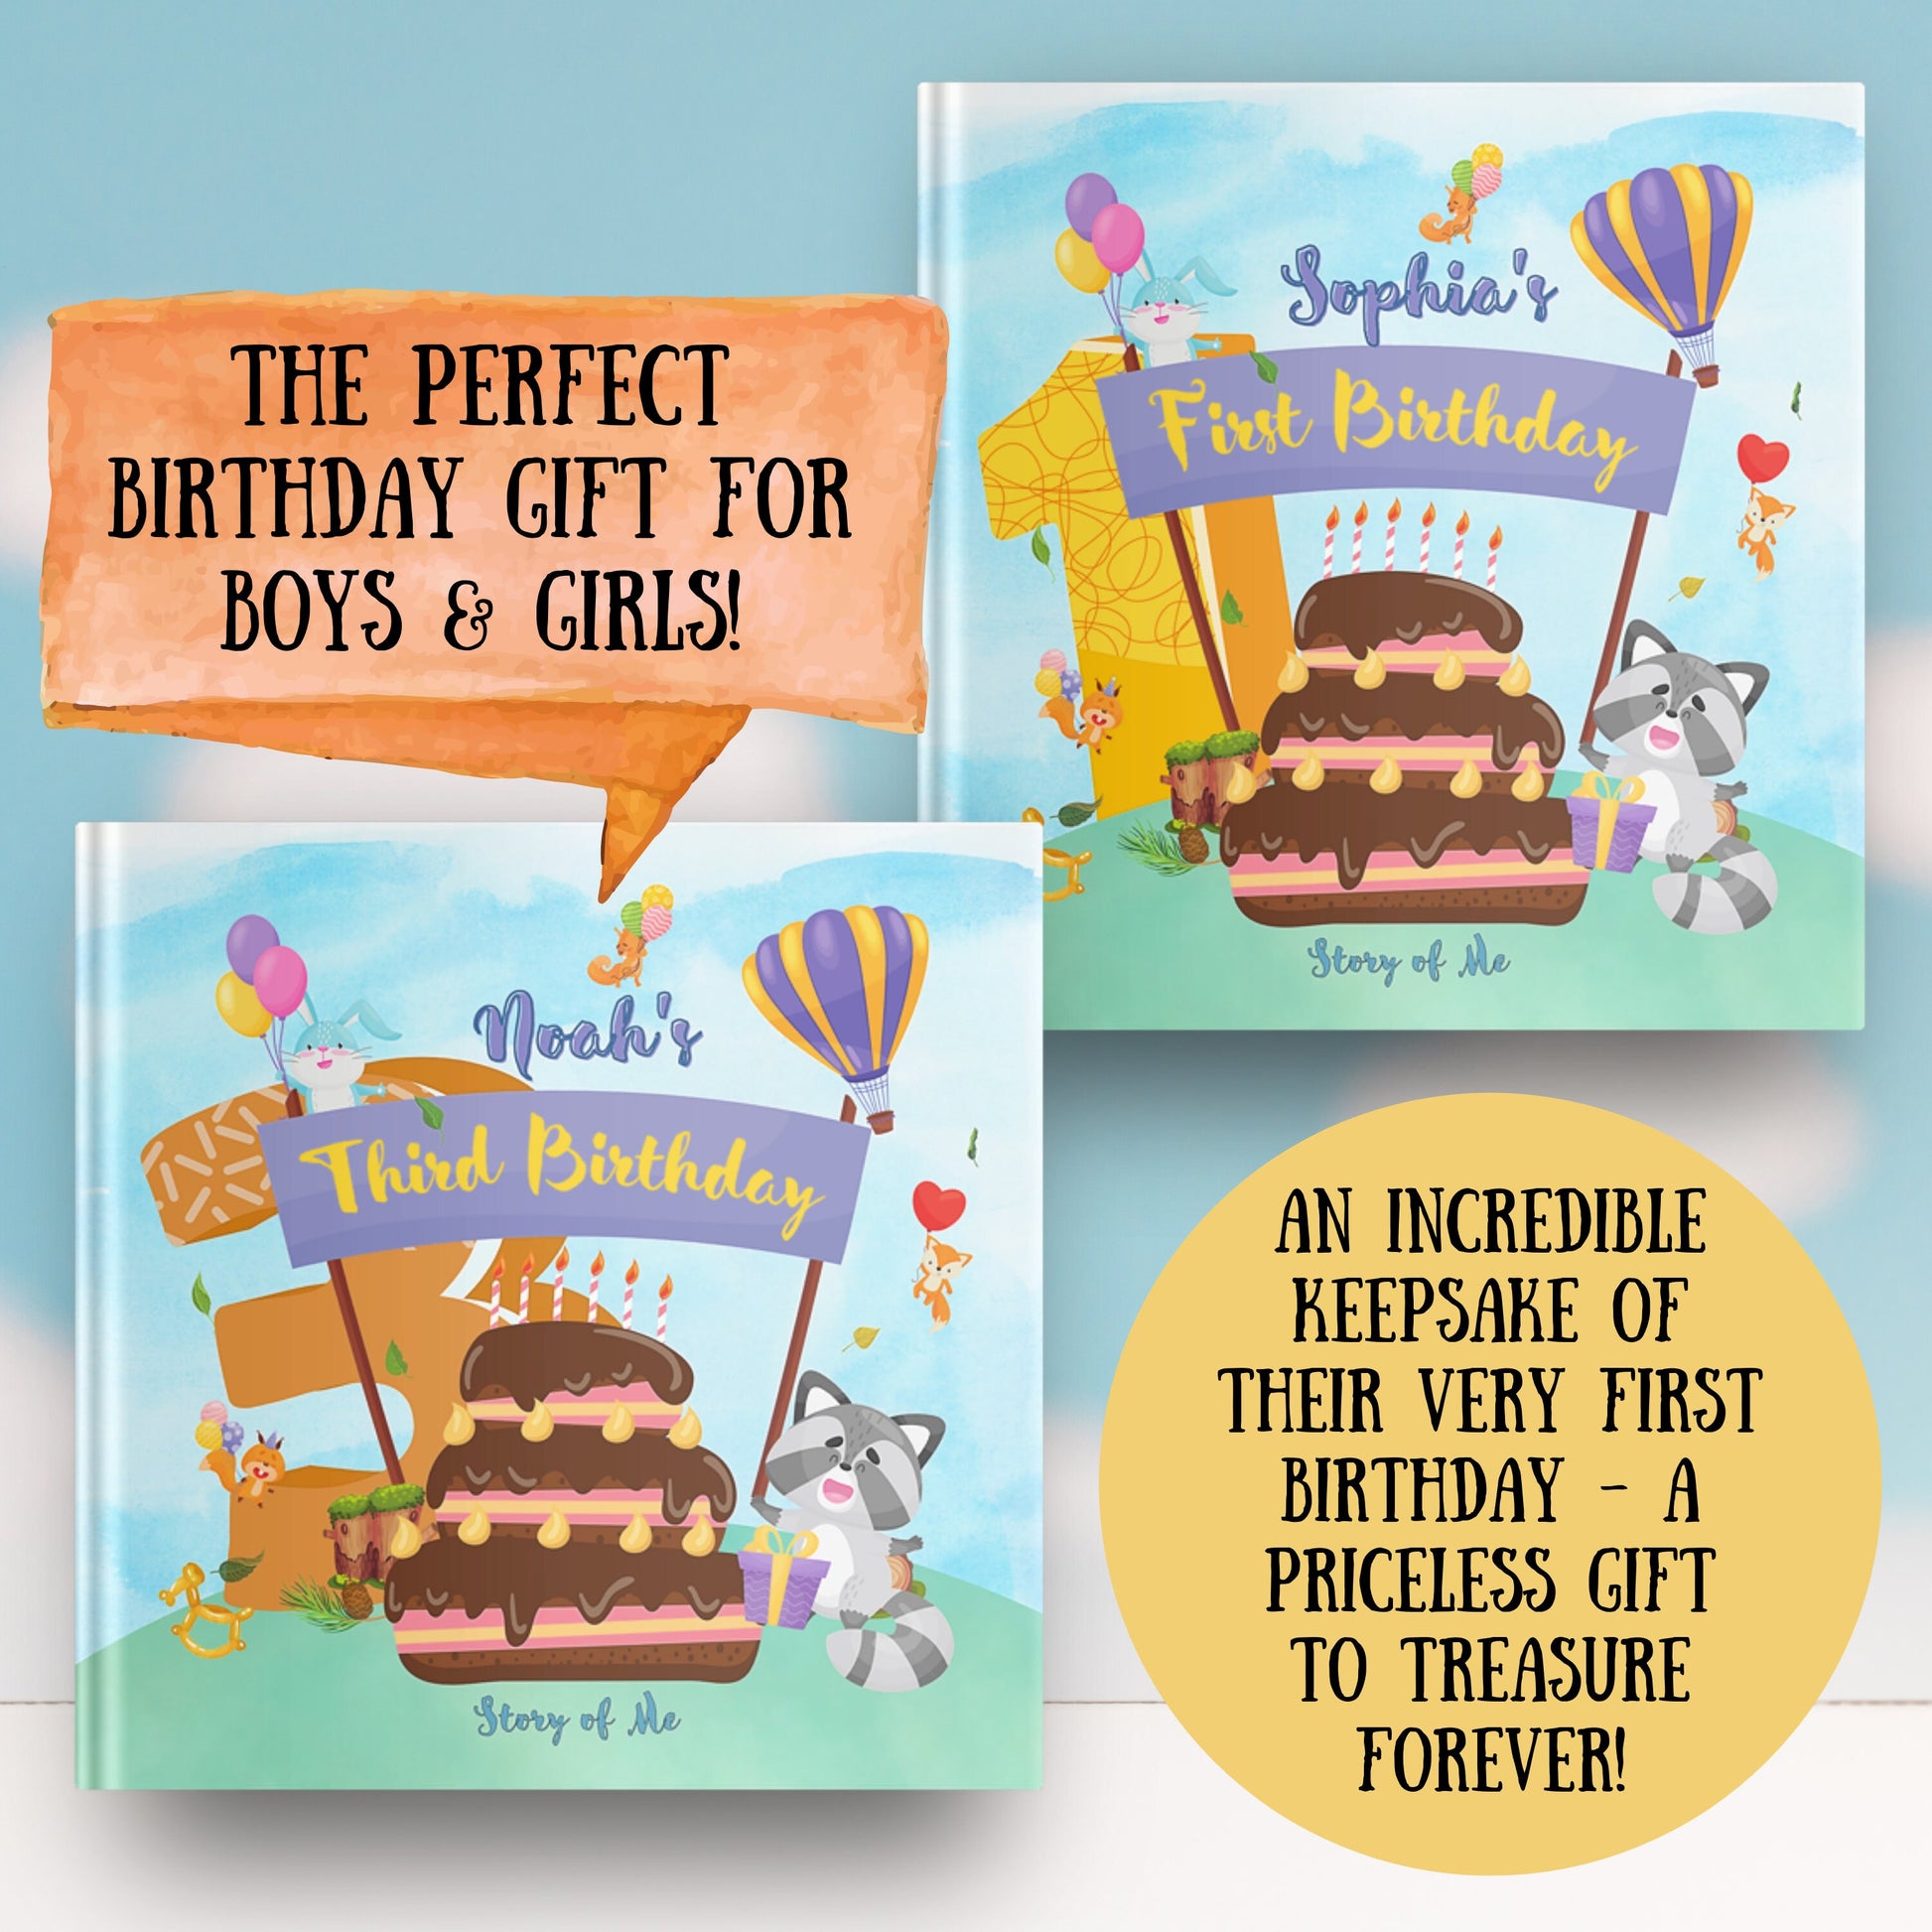 Personalized Third Birthday Book - My Third Birthday - Custom Book with Child's name and other personalizations - great gift